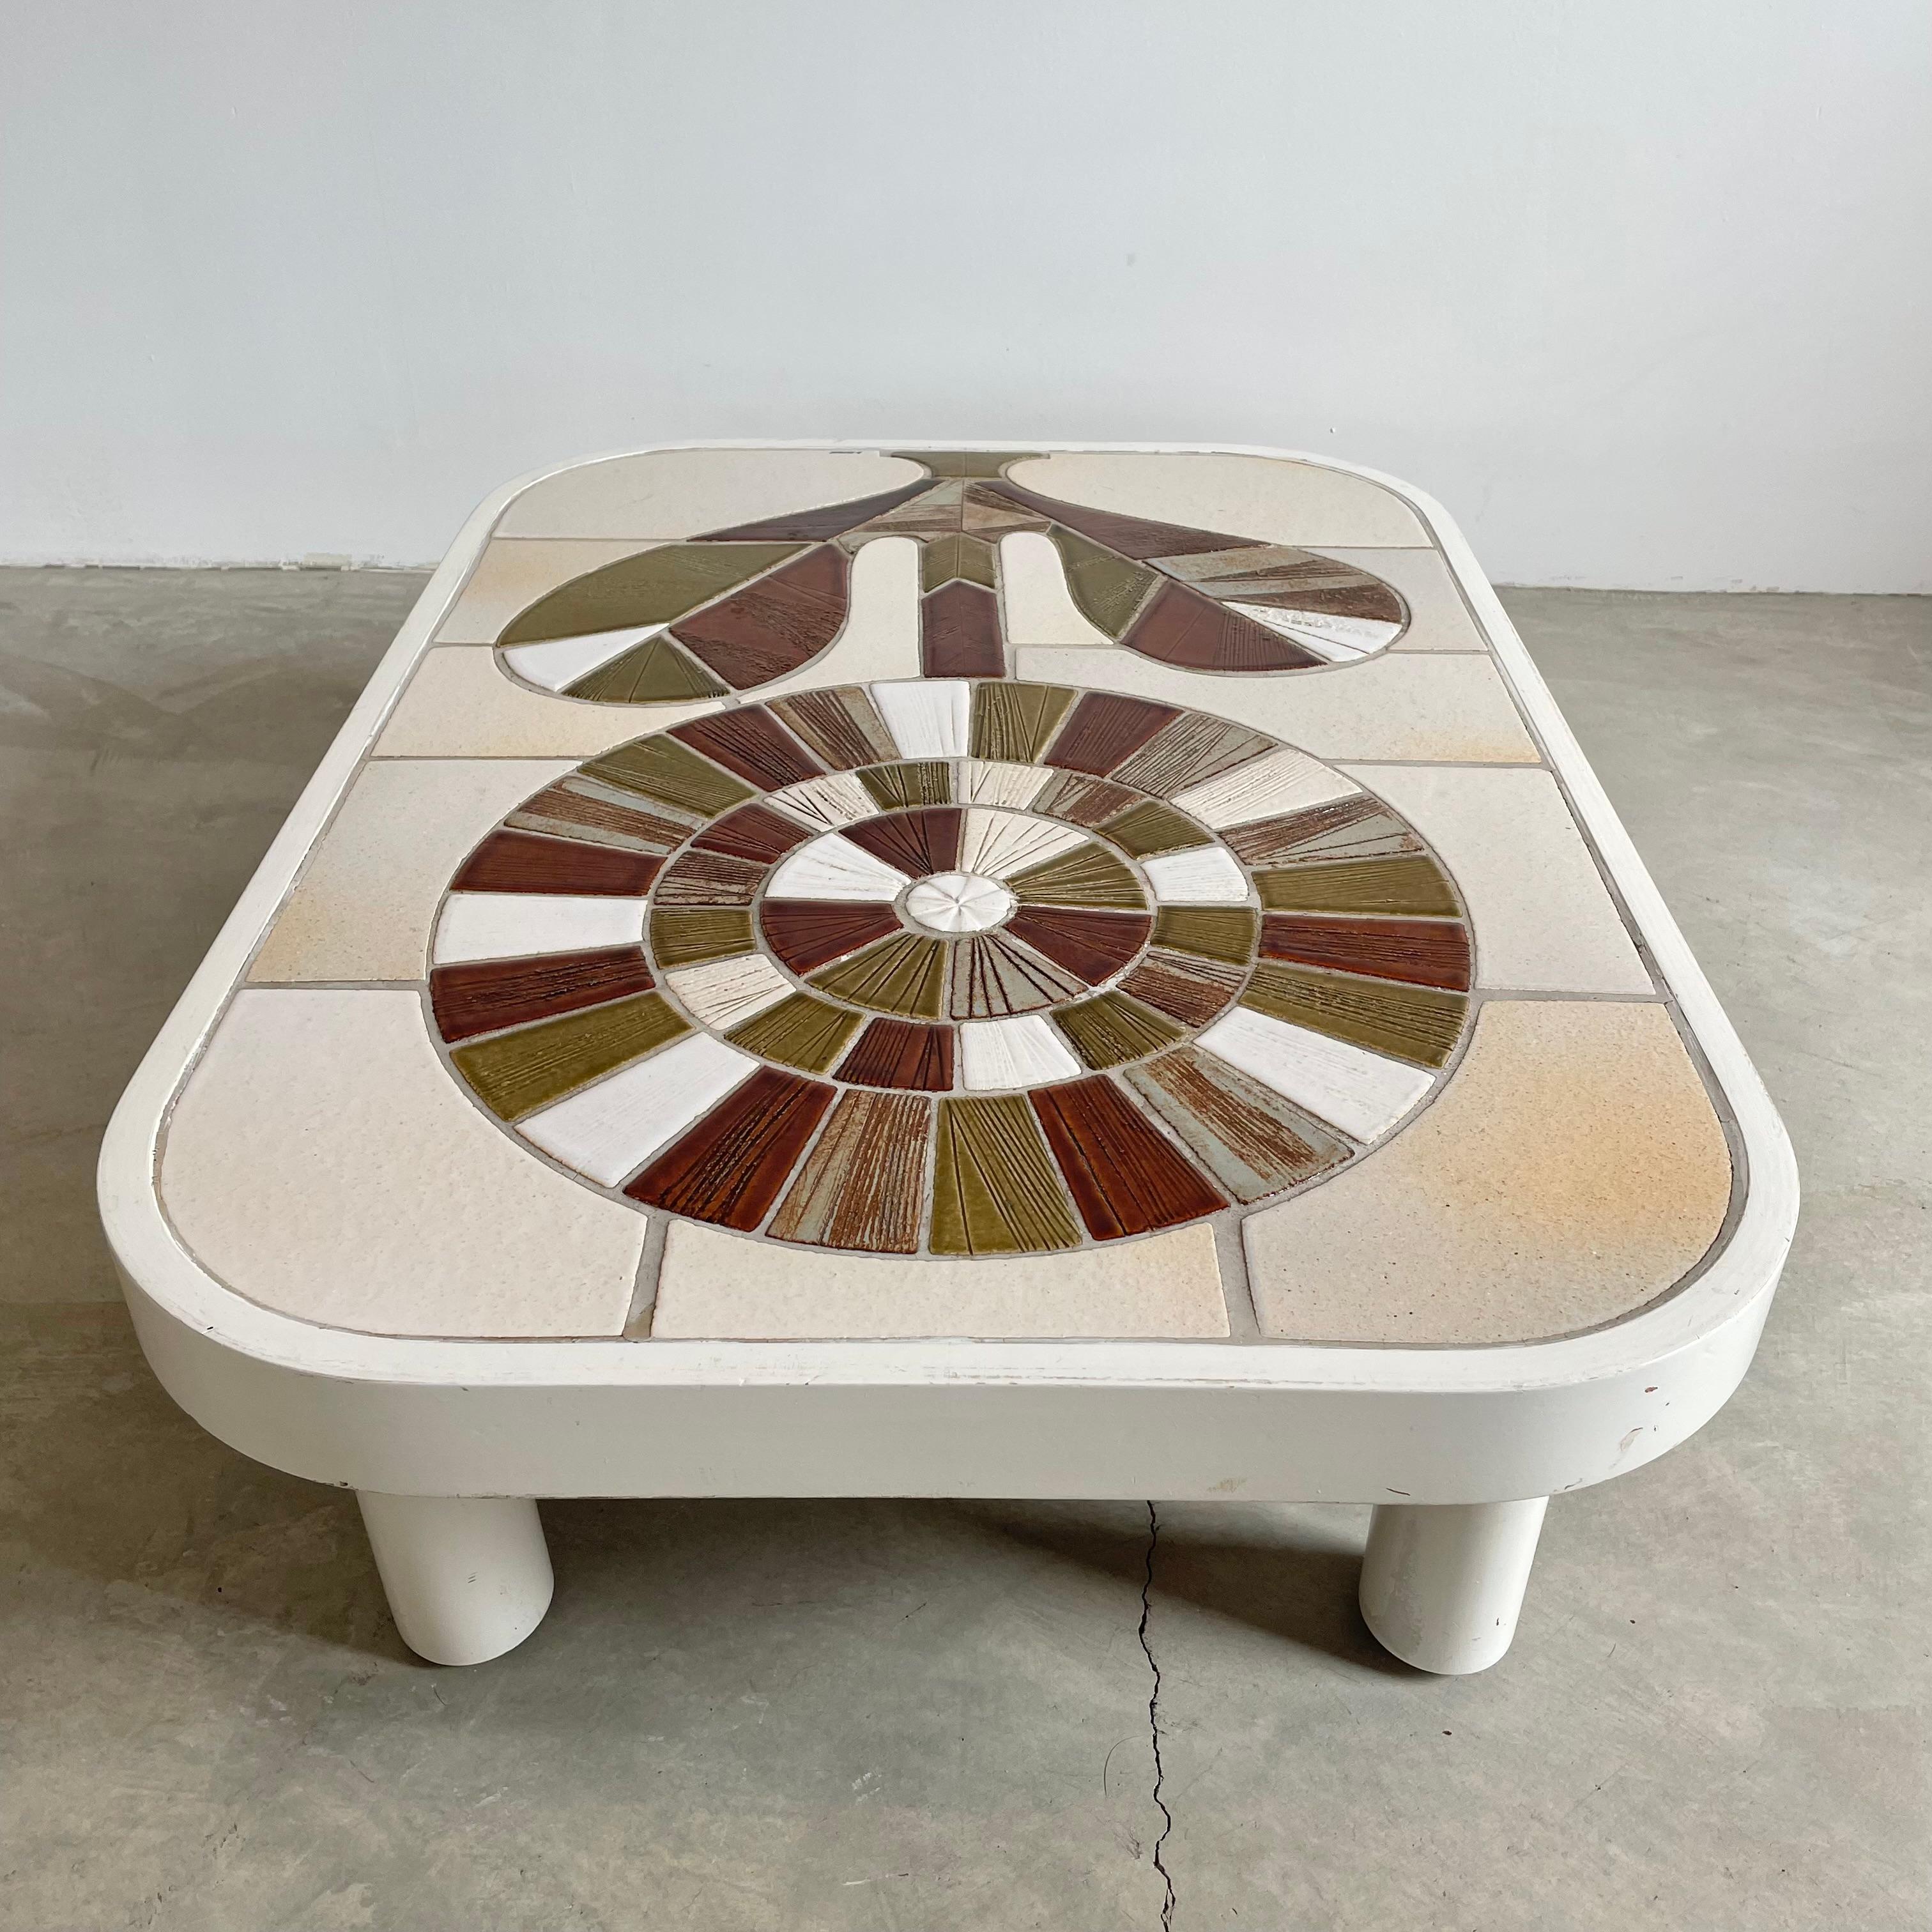 Ceramic Roger Capron Coffee Table, 1970s, France